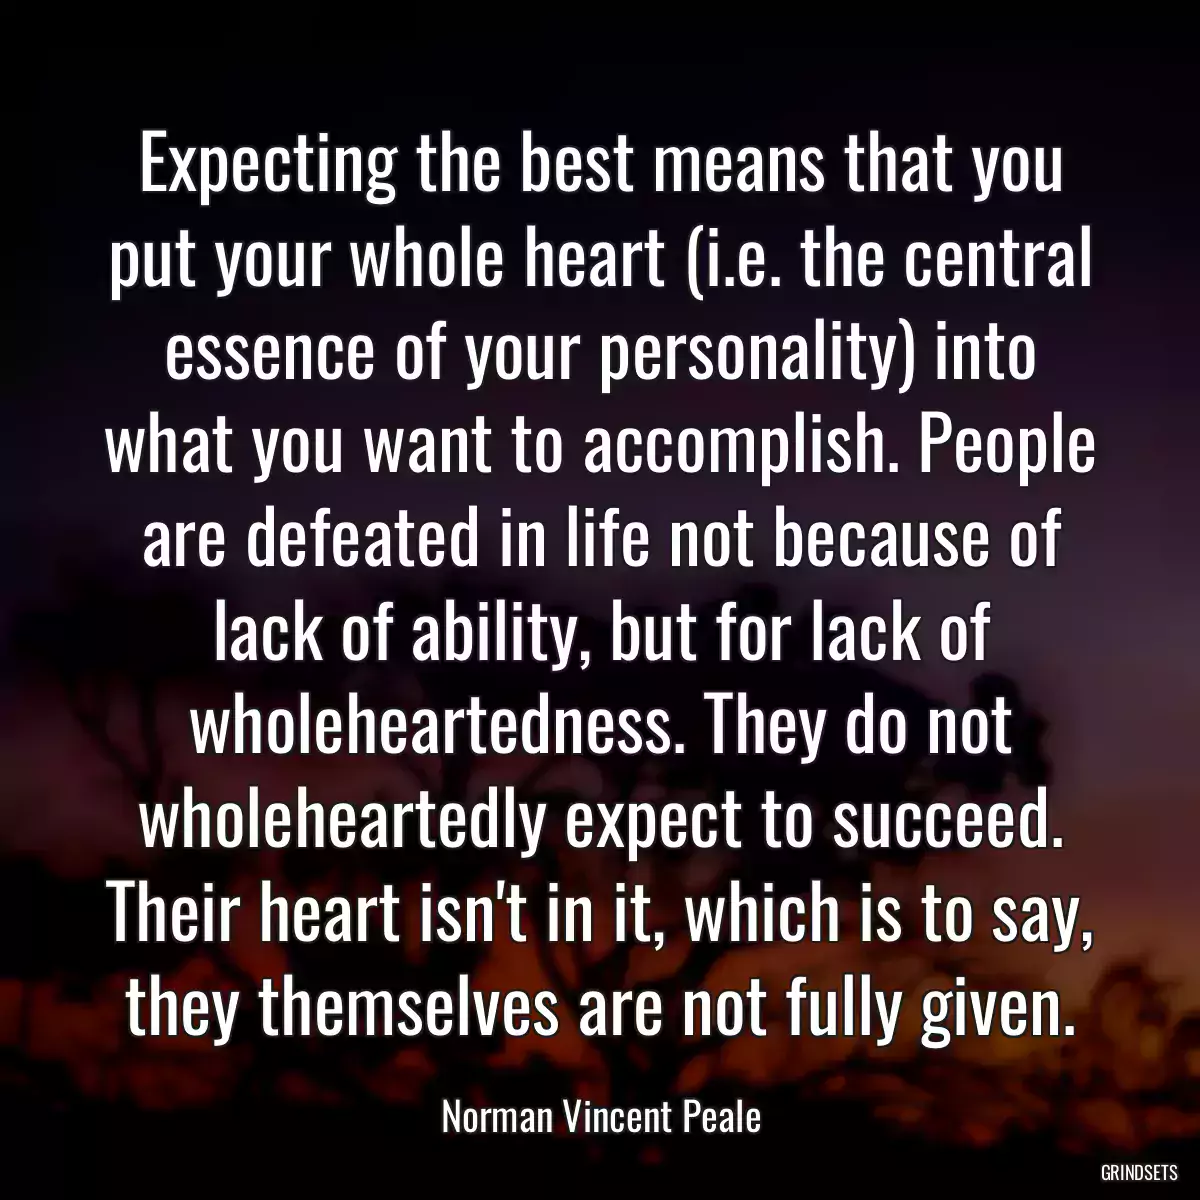 Expecting the best means that you put your whole heart (i.e. the central essence of your personality) into what you want to accomplish. People are defeated in life not because of lack of ability, but for lack of wholeheartedness. They do not wholeheartedly expect to succeed. Their heart isn\'t in it, which is to say, they themselves are not fully given.